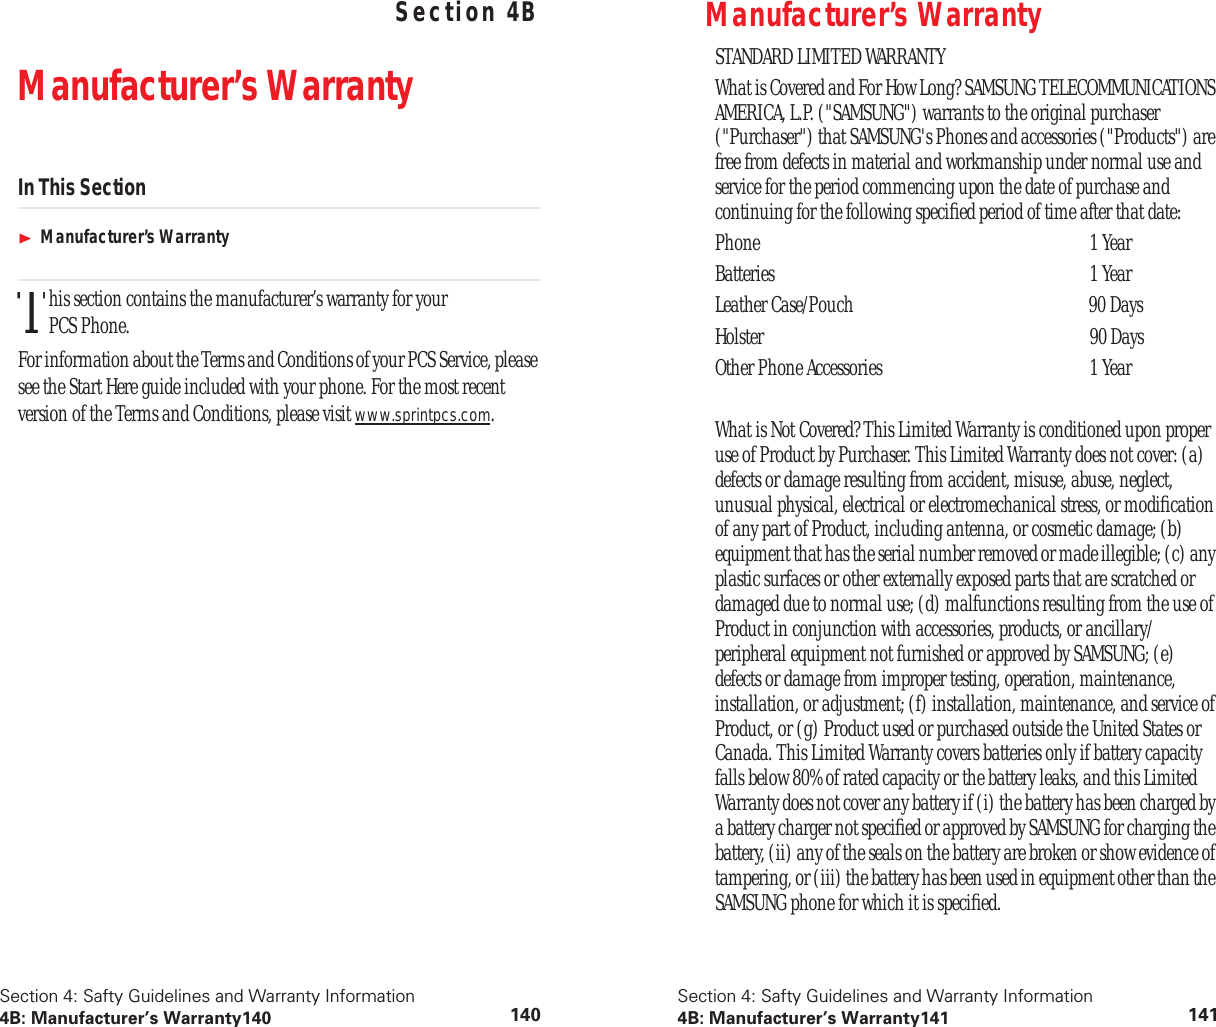 Section 4: Safty Guidelines and Warranty Information4B: Manufacturer’s Warranty140 140Safty Guidelines and Warranty Information Section 4BManufacturer’s WarrantyIn This SectionManufacturer’s Warrantyhis section contains the manufacturer’s warranty for your PCS Phone.For information about the Terms and Conditions of your PCS Service, please see the Start Here guide included with your phone. For the most recent version of the Terms and Conditions, please visit www.sprintpcs.com.TSection 4: Safty Guidelines and Warranty Information4B: Manufacturer’s Warranty141 141Manufacturer’s WarrantySTANDARD LIMITED WARRANTYWhat is Covered and For How Long? SAMSUNG TELECOMMUNICATIONS AMERICA, L.P. (&quot;SAMSUNG&quot;) warrants to the original purchaser (&quot;Purchaser&quot;) that SAMSUNG&apos;s Phones and accessories (&quot;Products&quot;) are free from defects in material and workmanship under normal use and service for the period commencing upon the date of purchase and continuing for the following speciﬁed period of time after that date:Phone 1 YearBatteries 1 YearLeather Case/Pouch  90 DaysHolster 90 DaysOther Phone Accessories  1 YearWhat is Not Covered? This Limited Warranty is conditioned upon proper use of Product by Purchaser. This Limited Warranty does not cover: (a) defects or damage resulting from accident, misuse, abuse, neglect, unusual physical, electrical or electromechanical stress, or modiﬁcation of any part of Product, including antenna, or cosmetic damage; (b) equipment that has the serial number removed or made illegible; (c) any plastic surfaces or other externally exposed parts that are scratched or damaged due to normal use; (d) malfunctions resulting from the use of Product in conjunction with accessories, products, or ancillary/peripheral equipment not furnished or approved by SAMSUNG; (e) defects or damage from improper testing, operation, maintenance, installation, or adjustment; (f) installation, maintenance, and service of Product, or (g) Product used or purchased outside the United States or Canada. This Limited Warranty covers batteries only if battery capacity falls below 80% of rated capacity or the battery leaks, and this Limited Warranty does not cover any battery if (i) the battery has been charged by a battery charger not speciﬁed or approved by SAMSUNG for charging the battery, (ii) any of the seals on the battery are broken or show evidence of tampering, or (iii) the battery has been used in equipment other than the SAMSUNG phone for which it is speciﬁed.